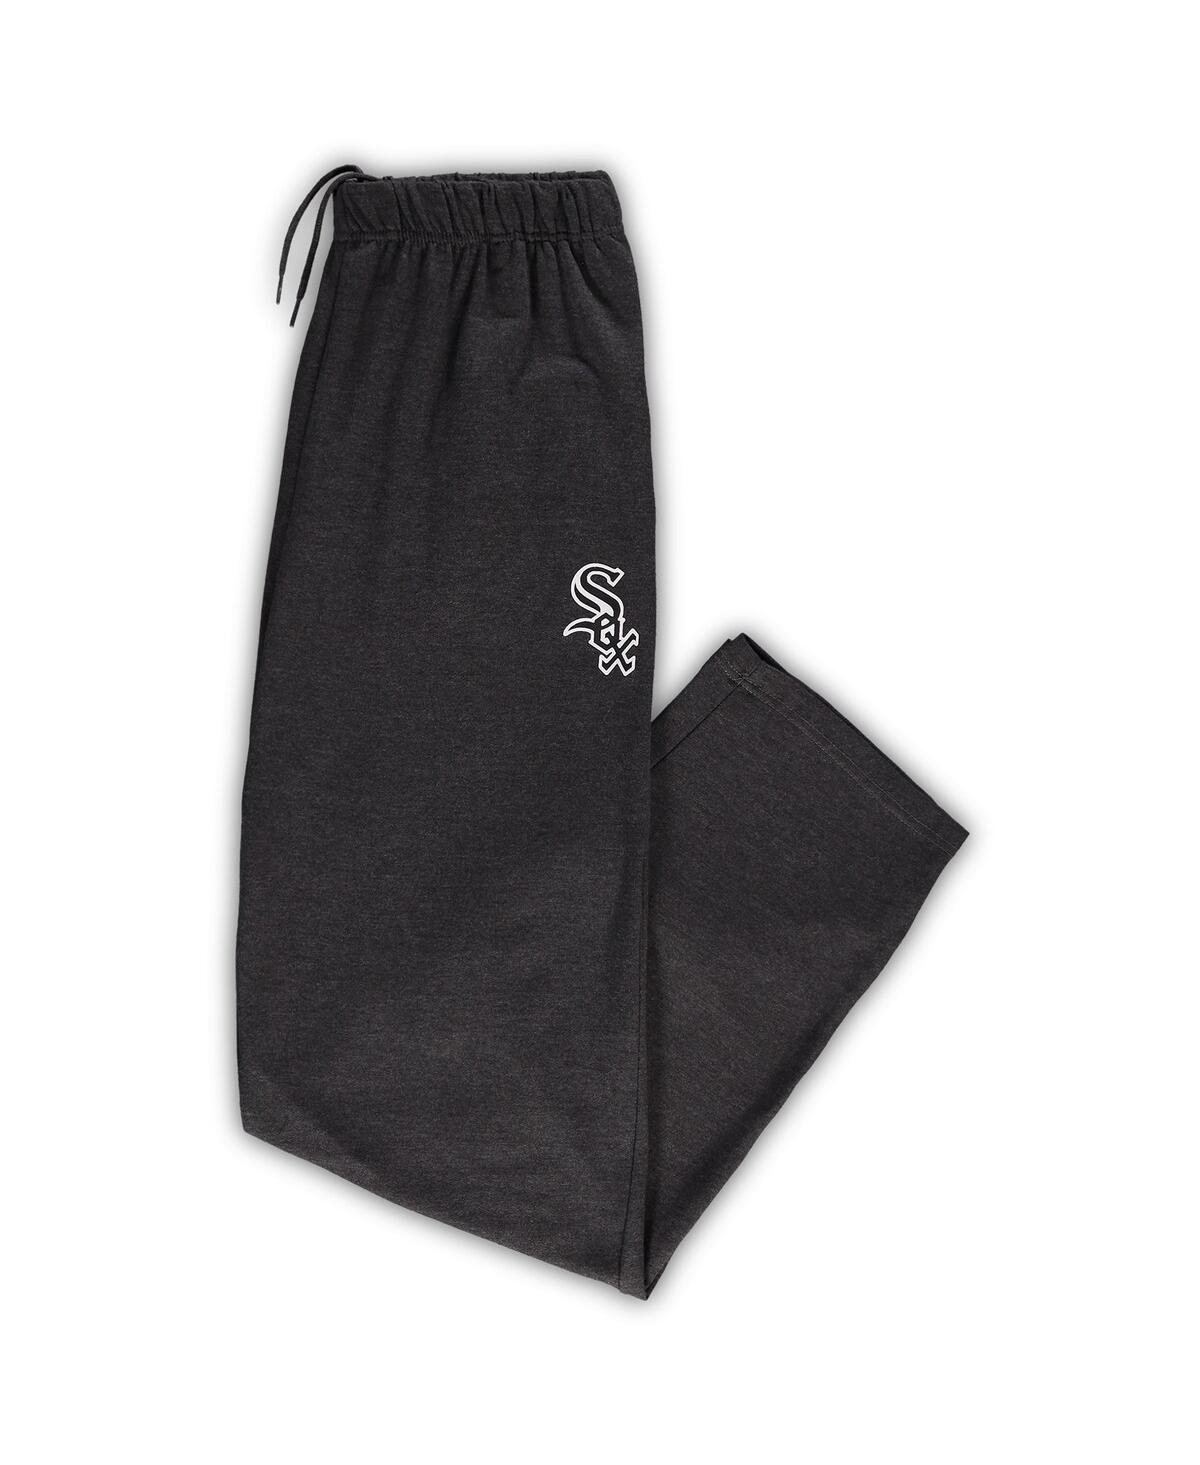 PROFILE MEN'S HEATHERED CHARCOAL CHICAGO WHITE SOX BIG AND TALL PAJAMA PANTS